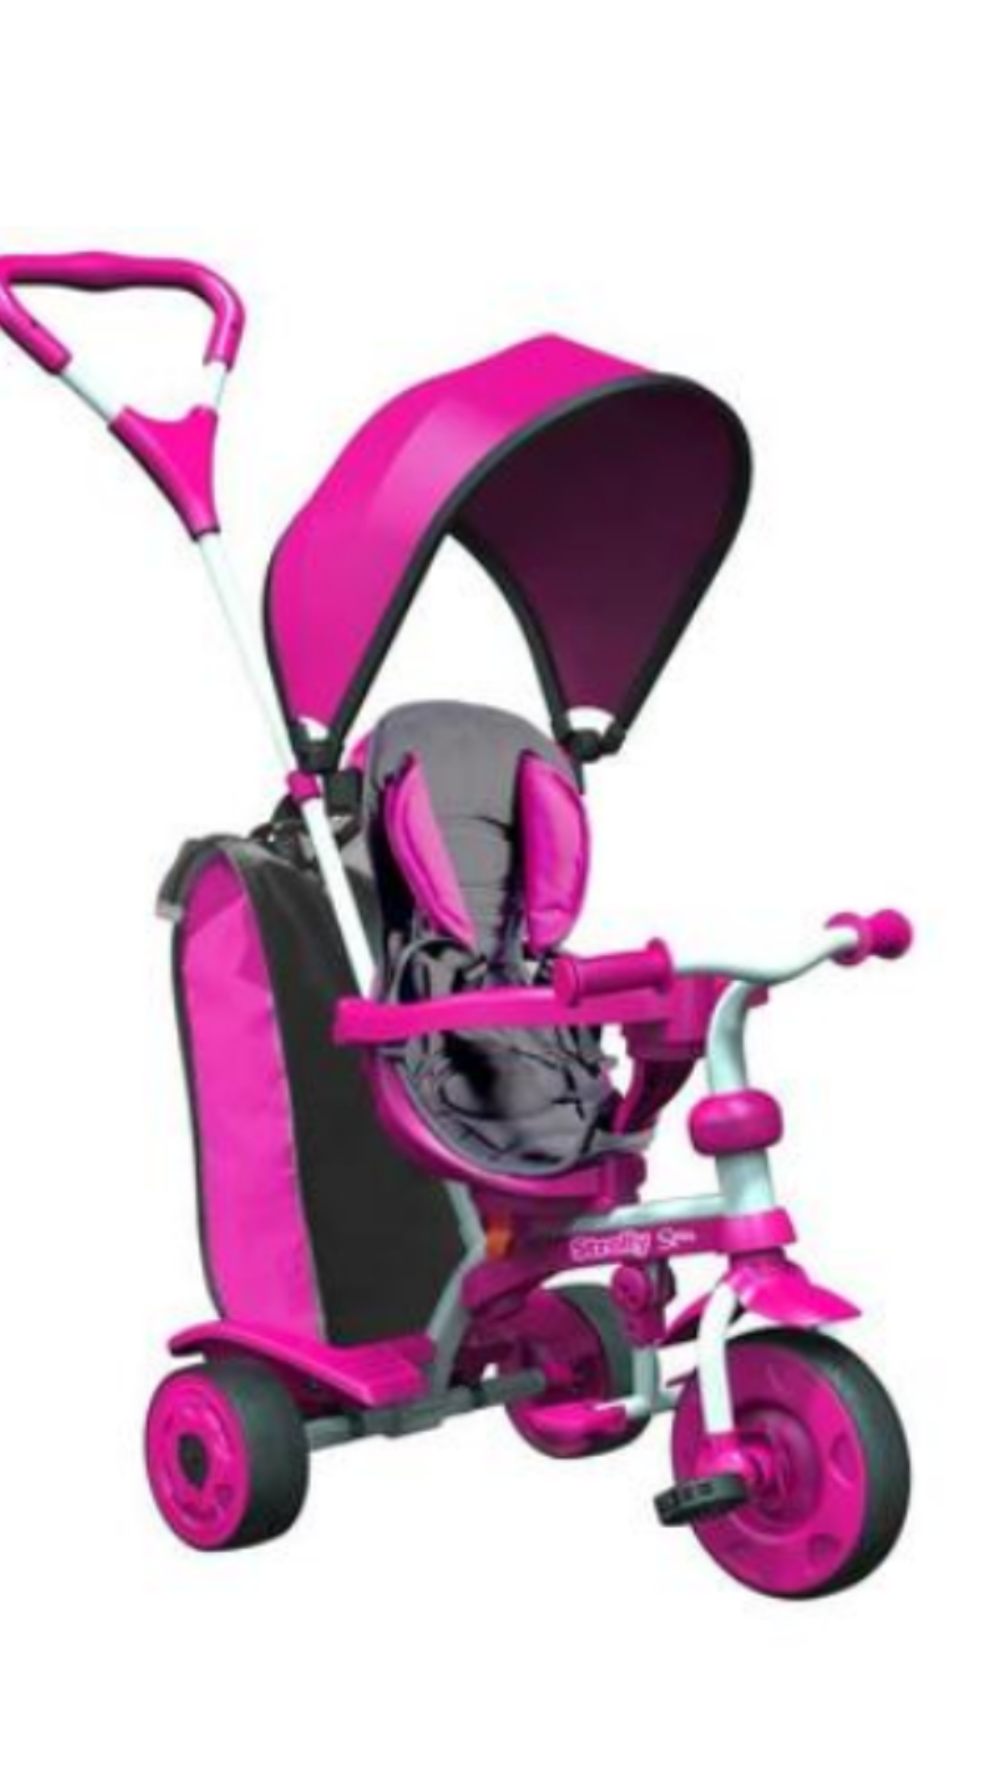 V&eacute;lo strolly spin rose Jeux / jouets